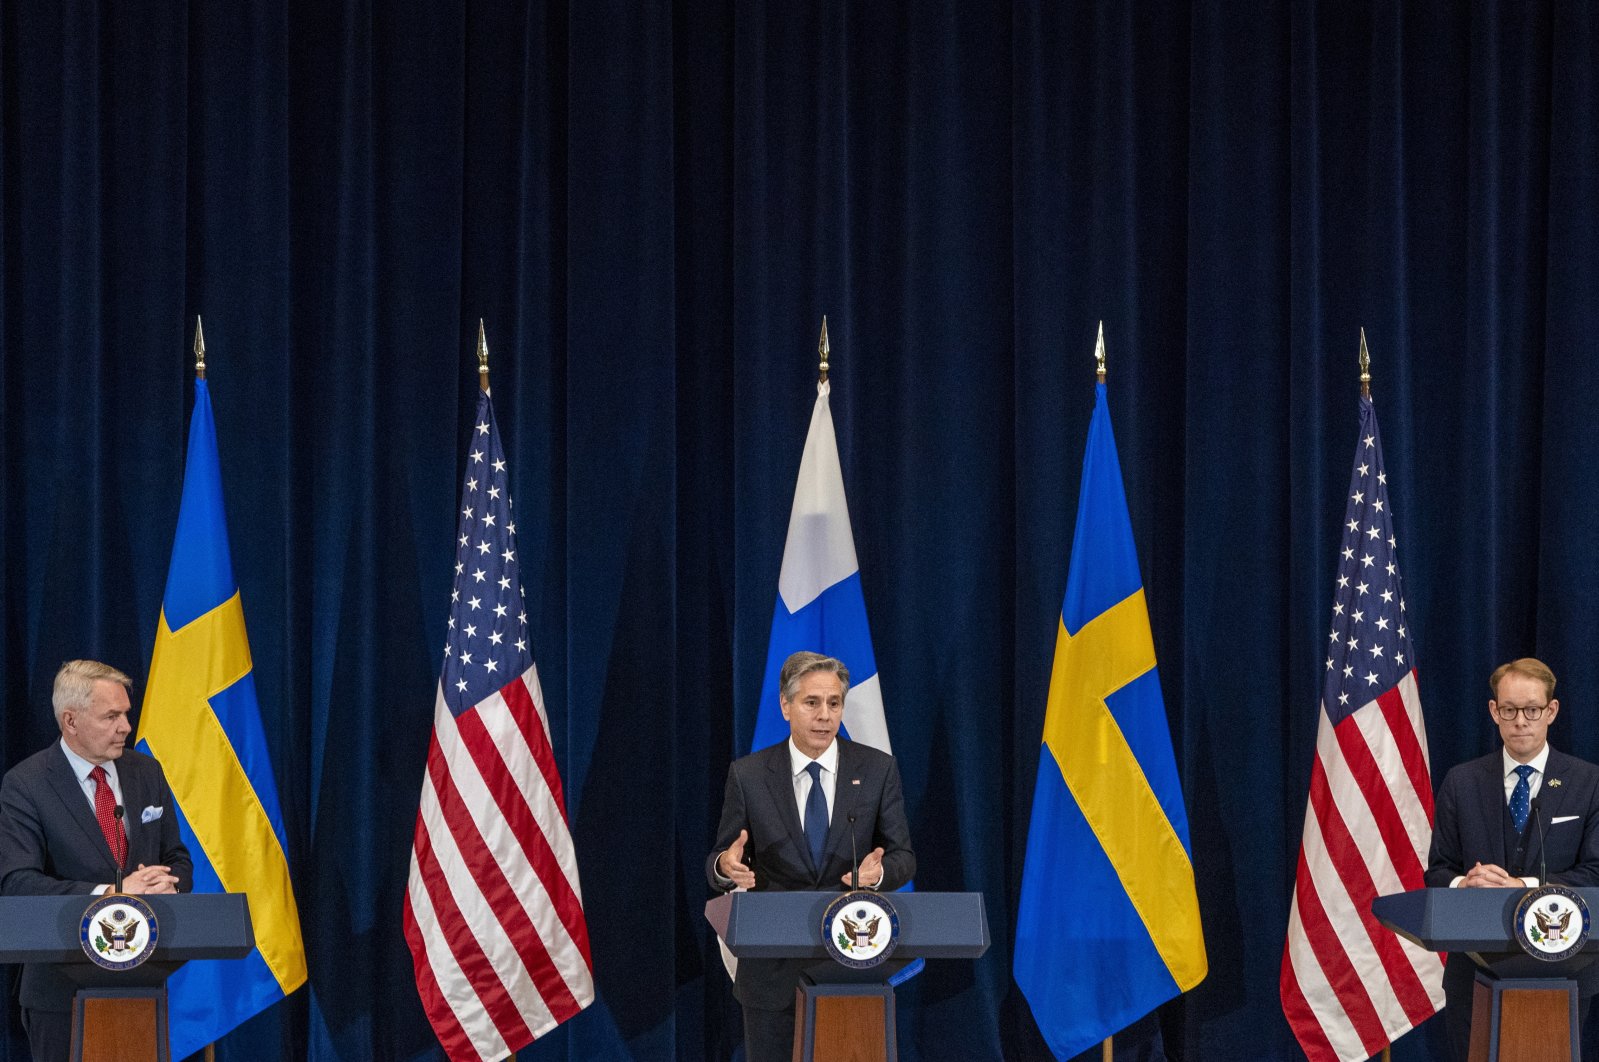 (L-R) Finland&#039;s Foreign Minister Pekka Haavisto, U.S. Secretary of State Antony Blinken and Sweden&#039;s Foreign Minister Tobias Billstroem address a joint press conference at the U.S. State Department in Washington, D.C., United States, Dec. 8, 2022. (EPA Photo)